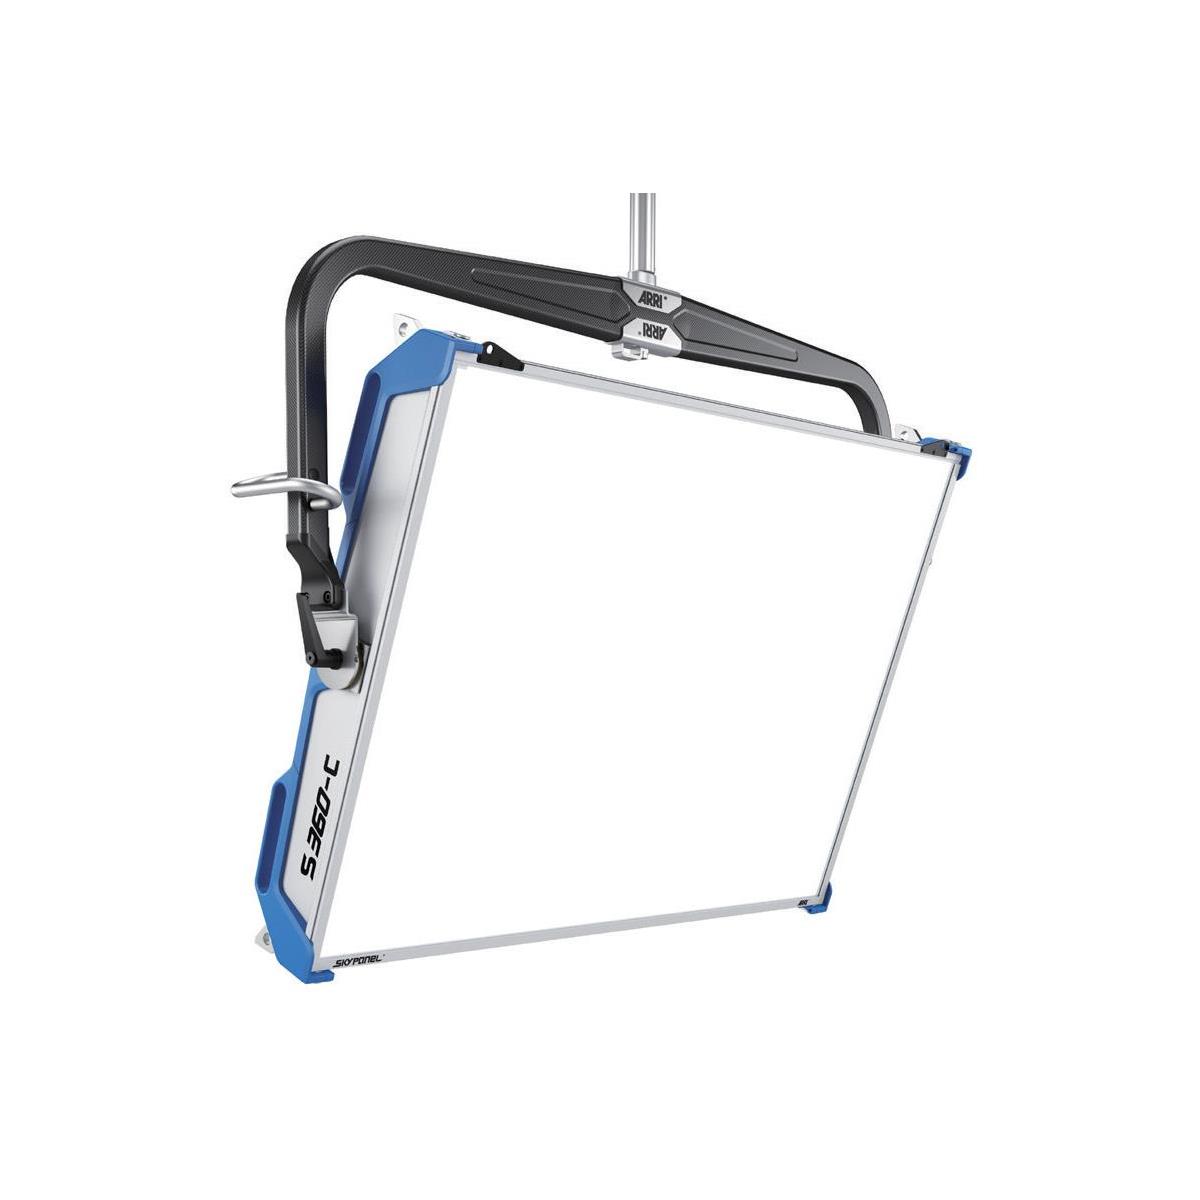 ARRI SkyPanel S360-C LED Light Kit (Bare Ends) without Accessories -  L0.0019705